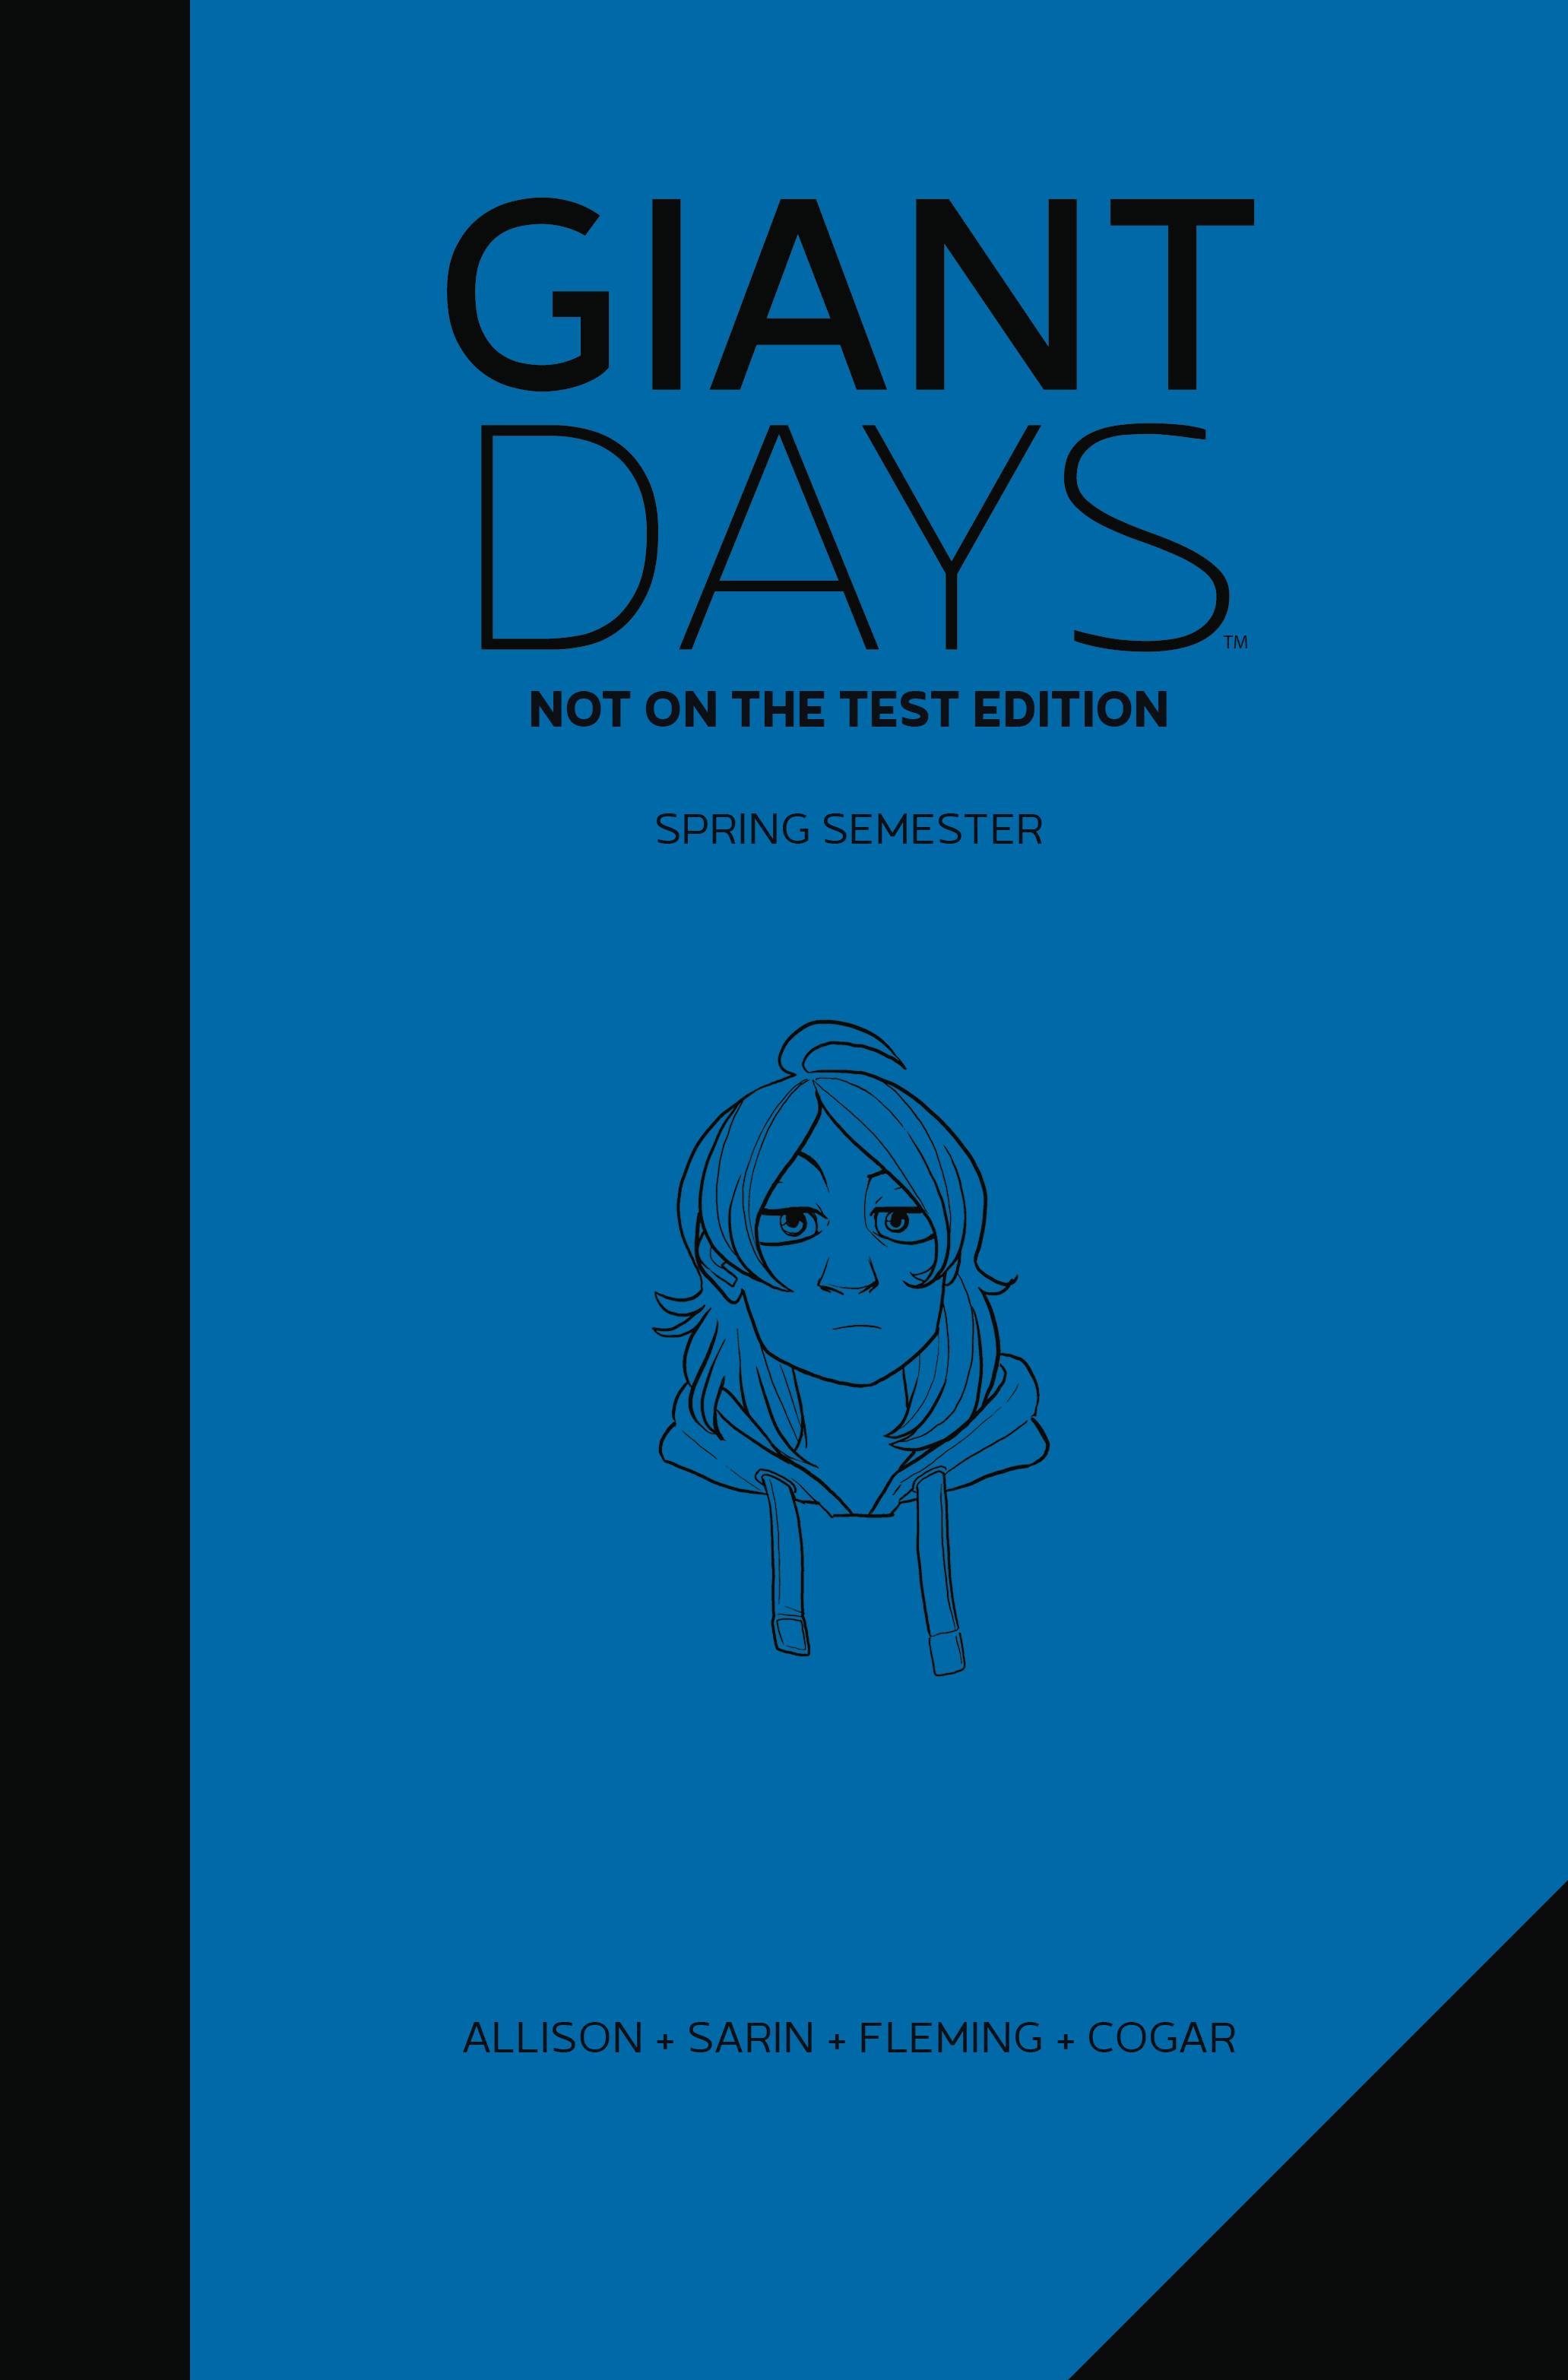 Giant Days Not on the Test Edition Hardcover Volume 2